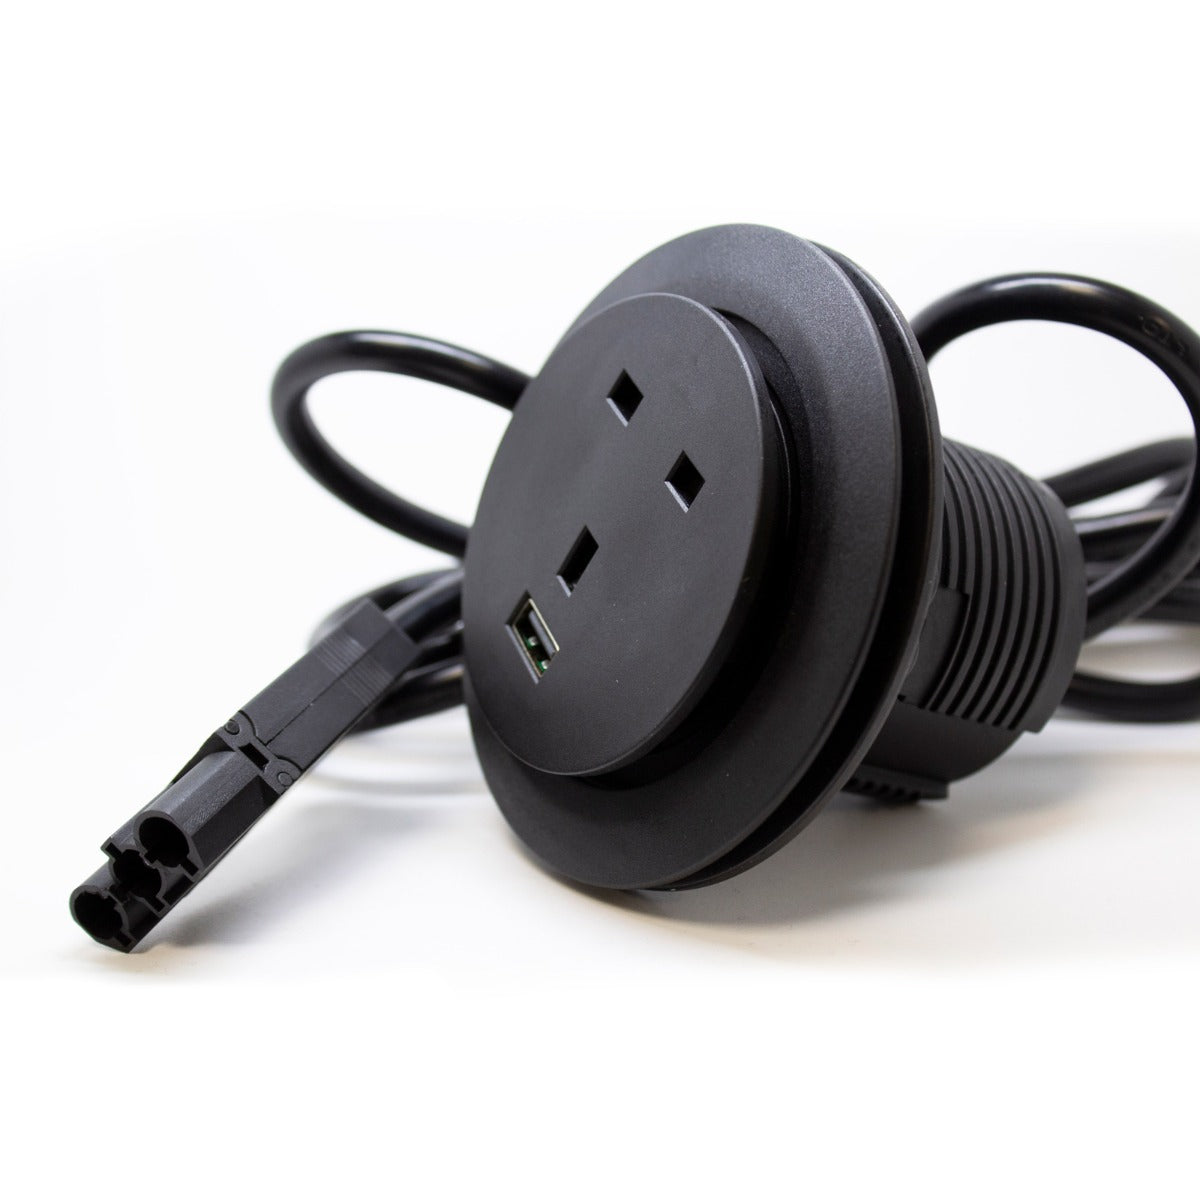 Ion Cable Hole Grommet Desktop Power - Fits 60mm or 80mm Cable Ports - 1 UK Socket - 1 USB A - White or Black Option Near Me